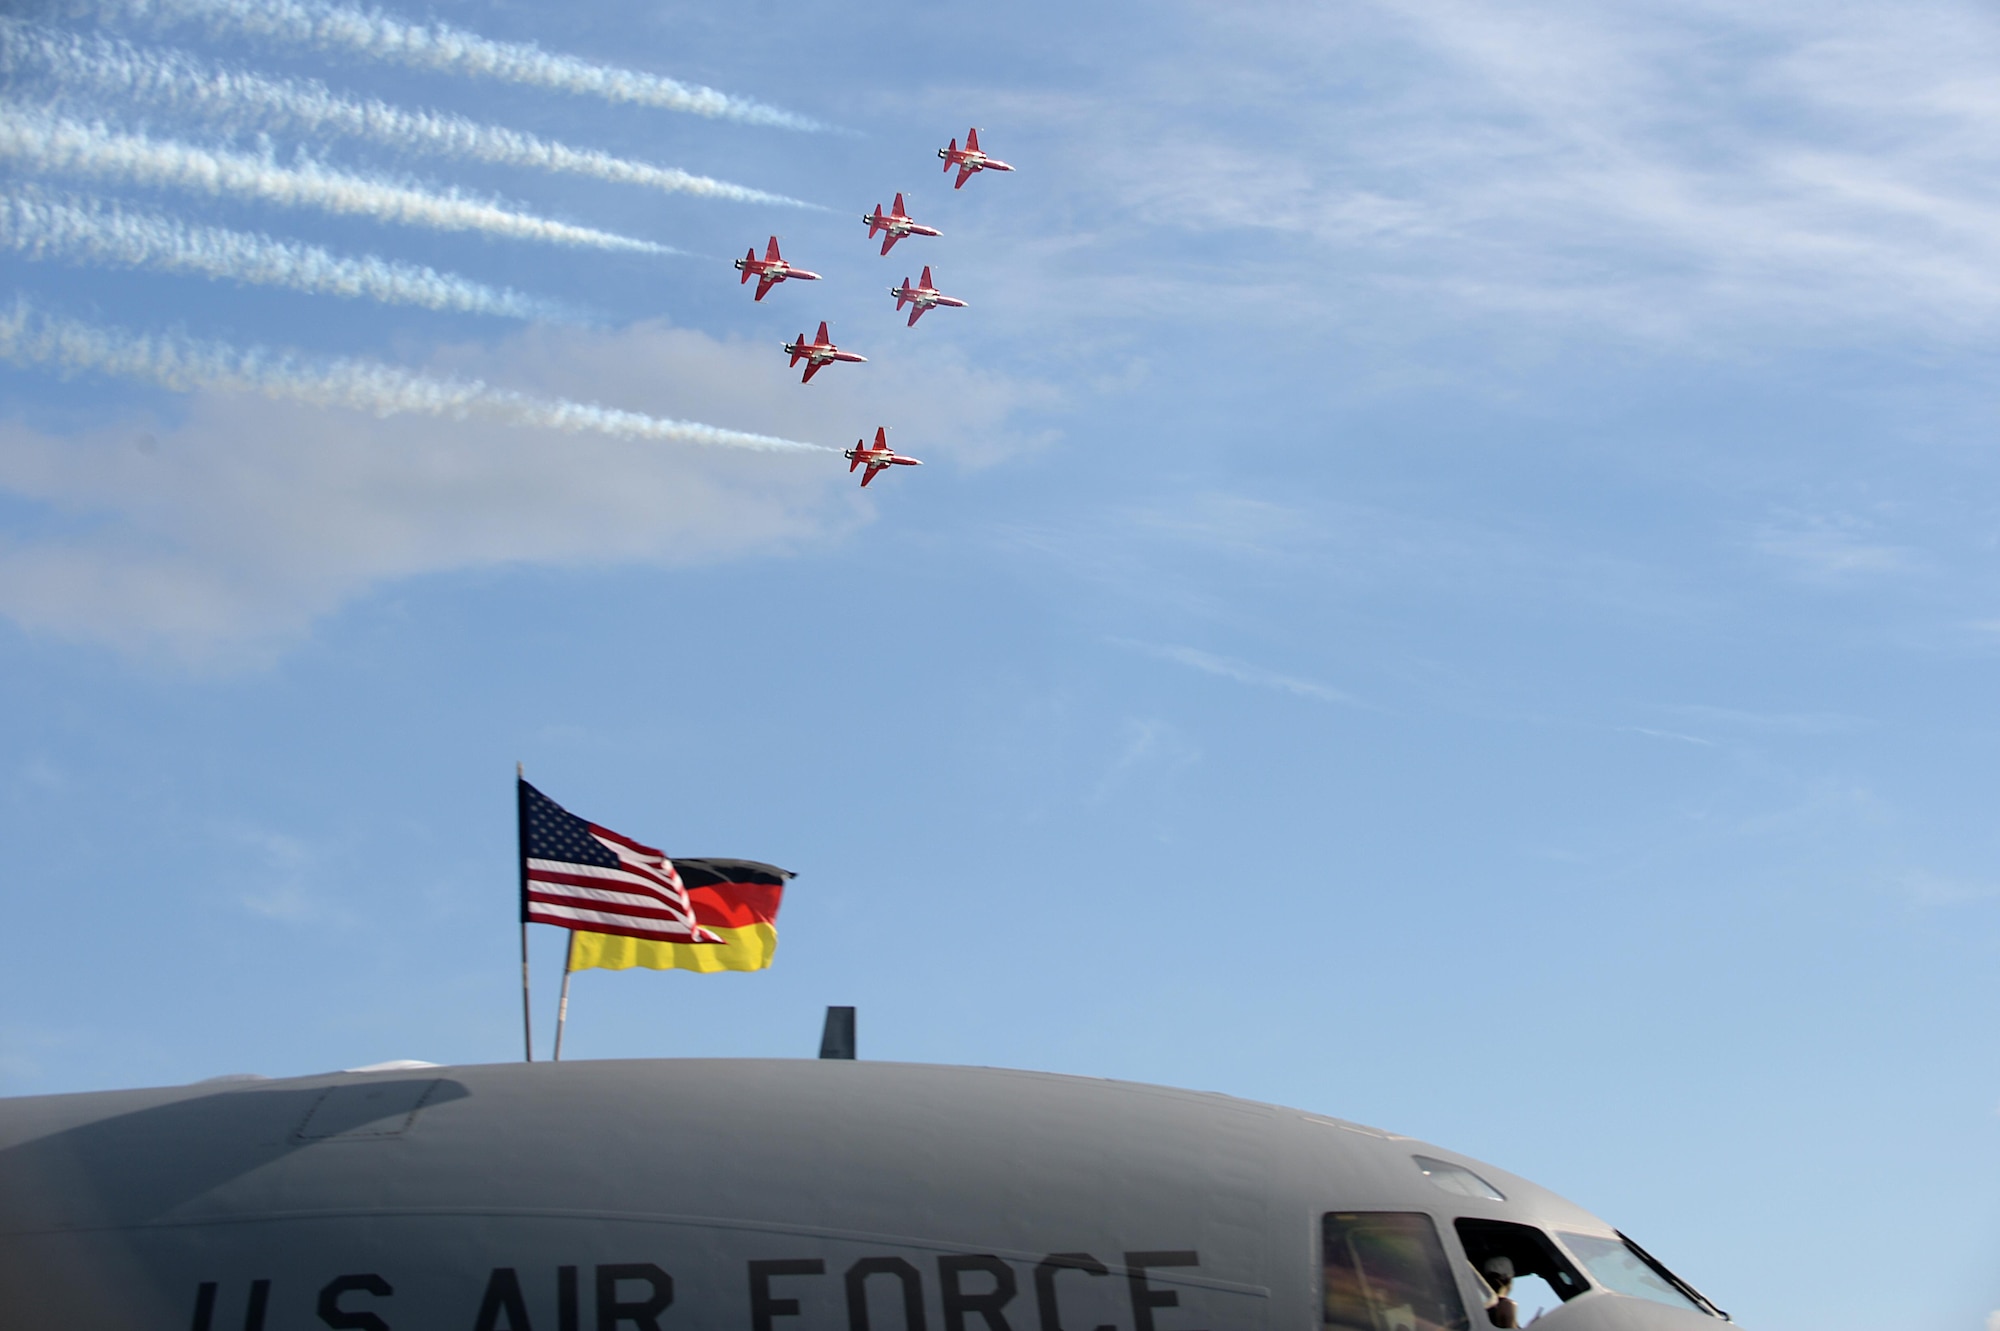 The  Patrouille Suisse, Swiss air force aerobatic team, perform at the Berlin Air and Trade Show, Berlin, June 3, 2016. Held every two years, the Berlin air show demonstrates a strong military presence and promotes U.S. ties with NATO and European partners. (U.S. Air Force photo/Staff Sgt. Emerson Nuñez)